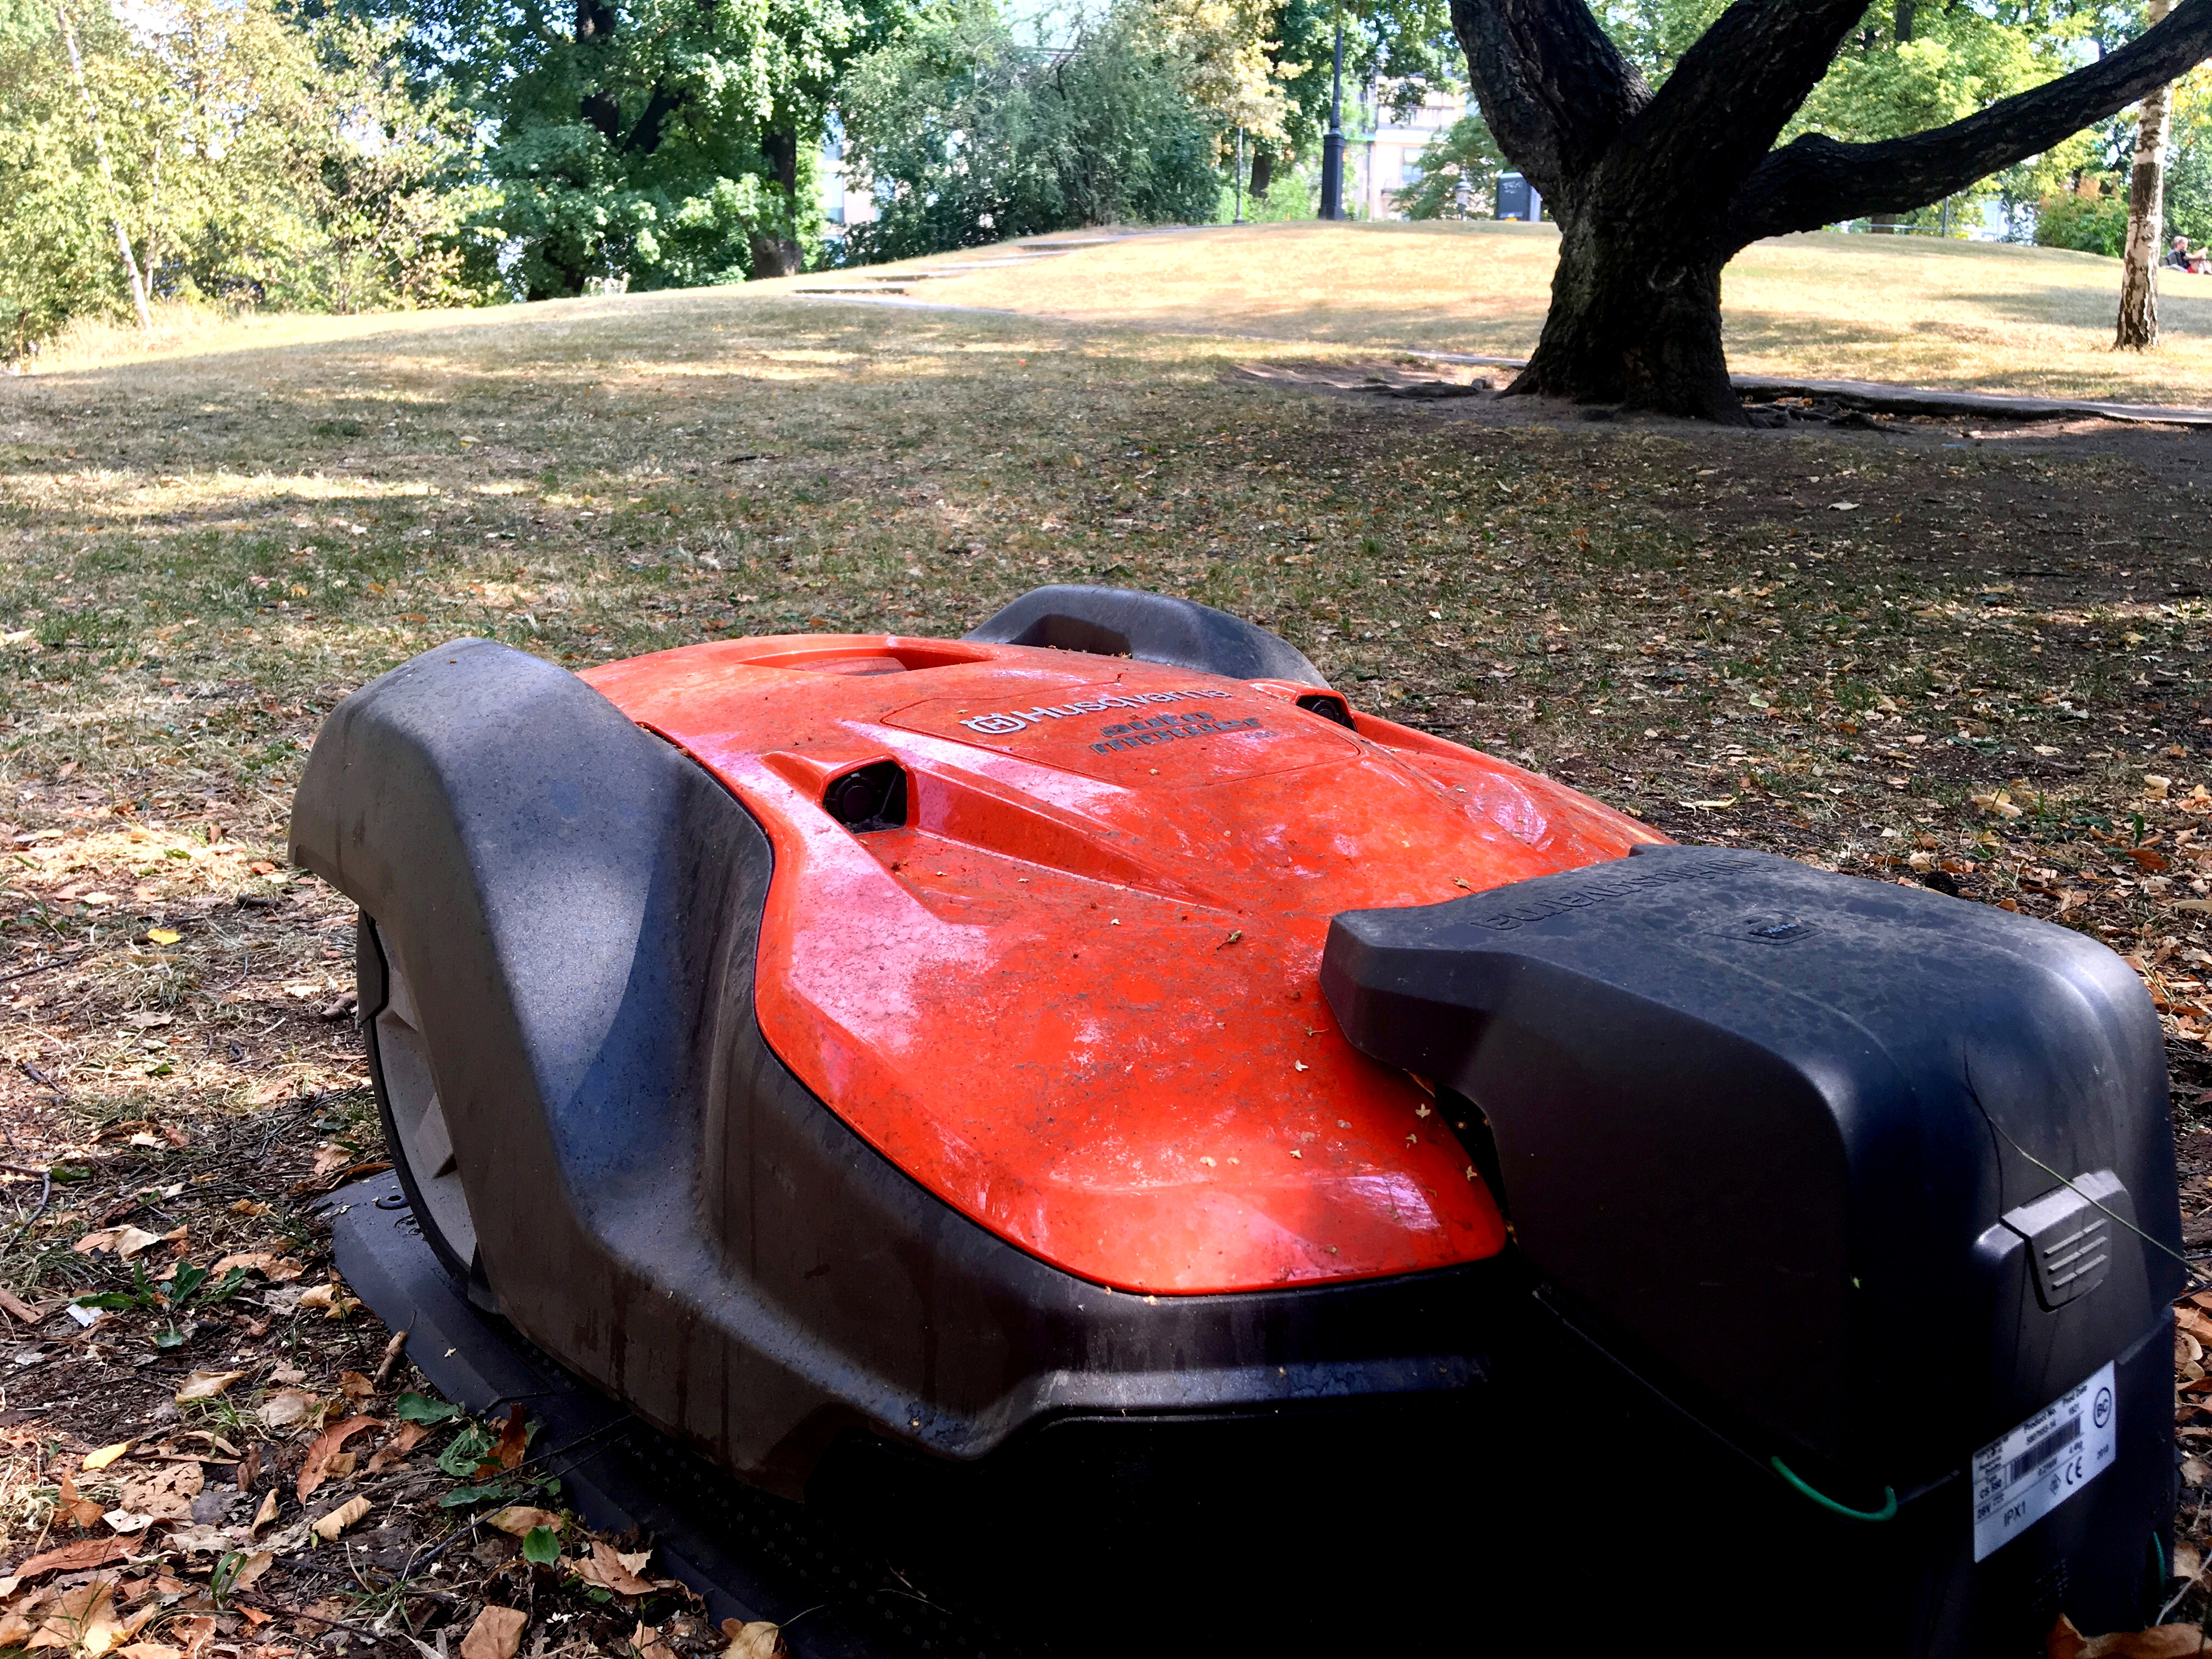 A Husqvarna robotic lawn mower is placed in its docking station in the Humlegarden park in Stockholm